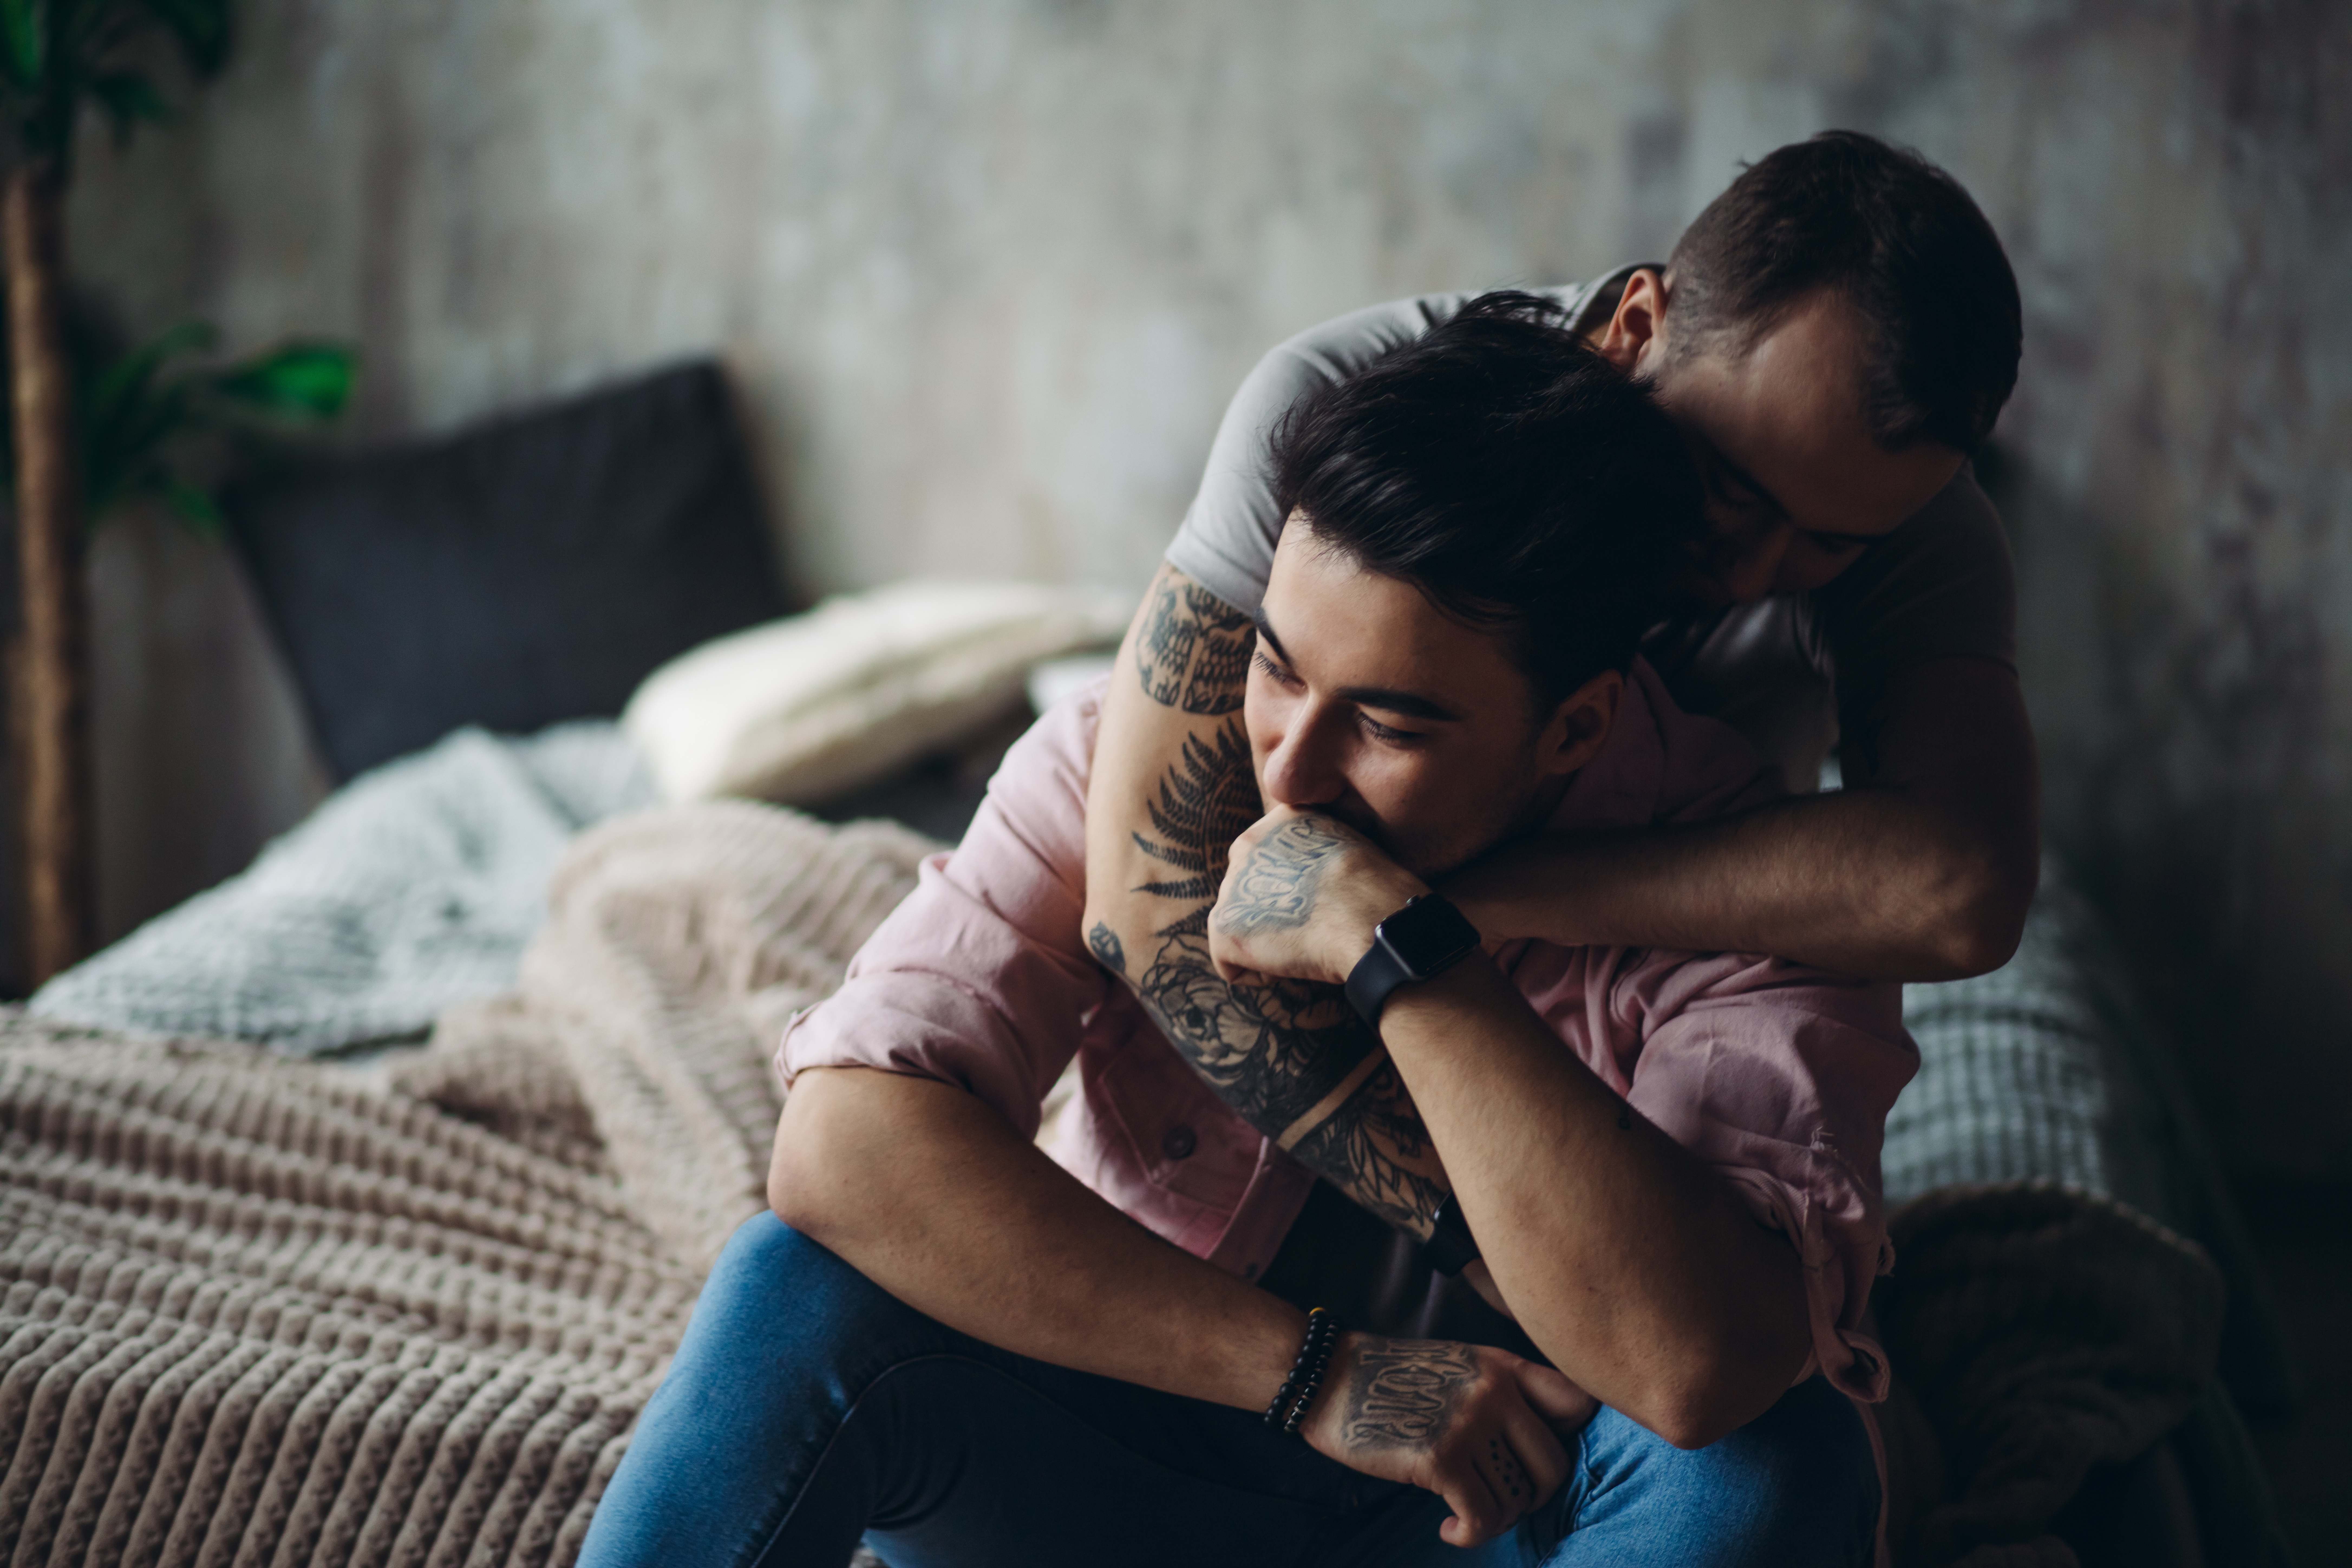 Happy gay couple embraced, joking and having fun in an intimate hug. Positive blue man embraces his friend, happy to be close to lover, sitting on bed at home, close up. Same-sex love relationship.